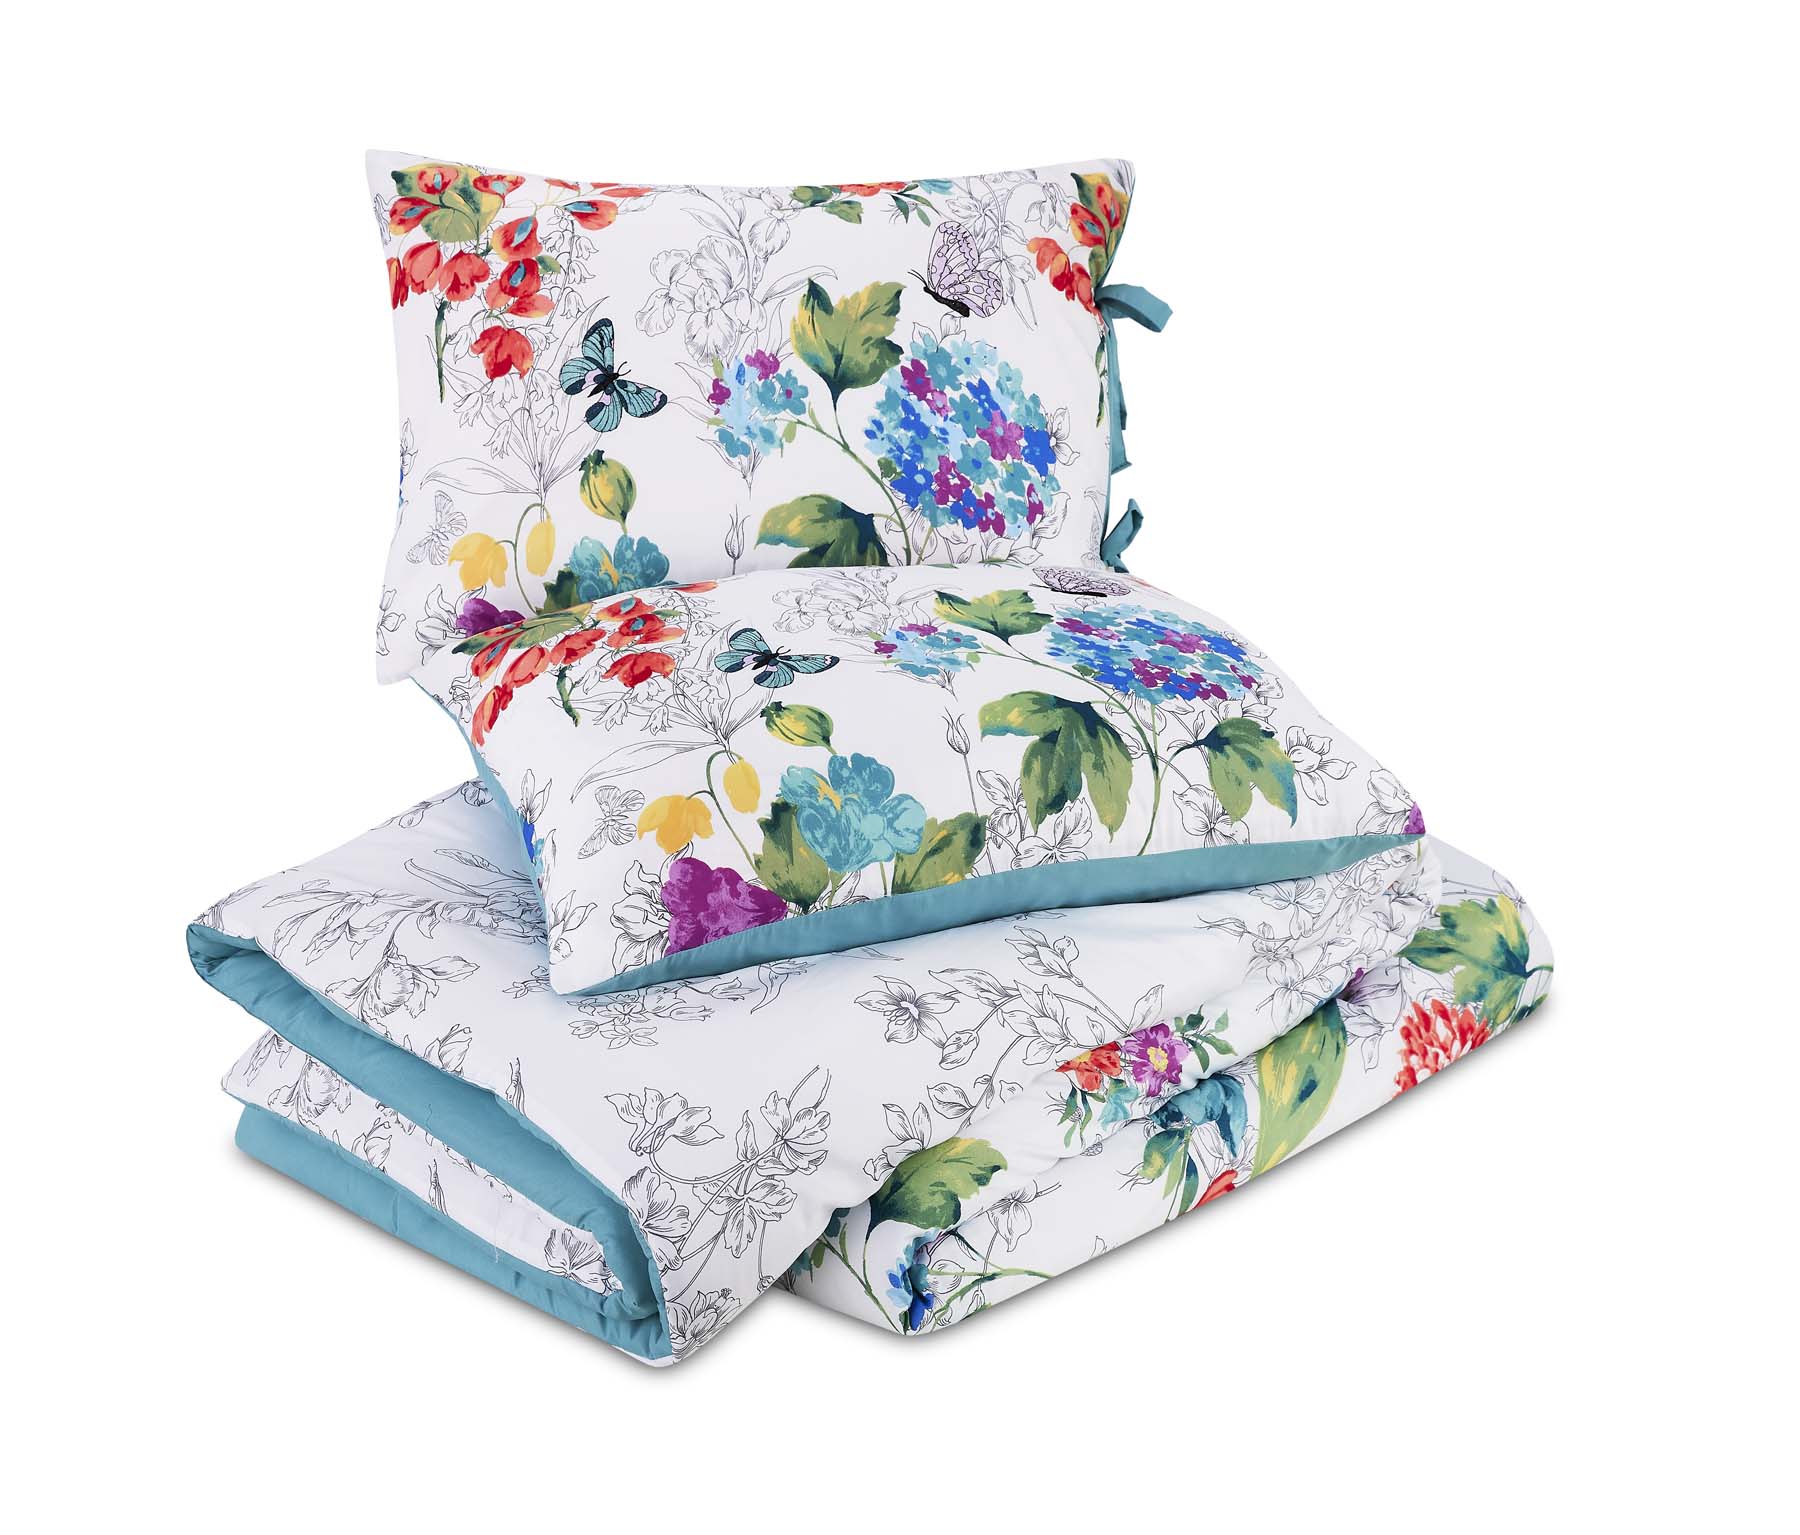 The Pioneer Woman Teal Polyester Blooming Bouquet 4-Piece Full/Queen Comforter Set - image 2 of 9